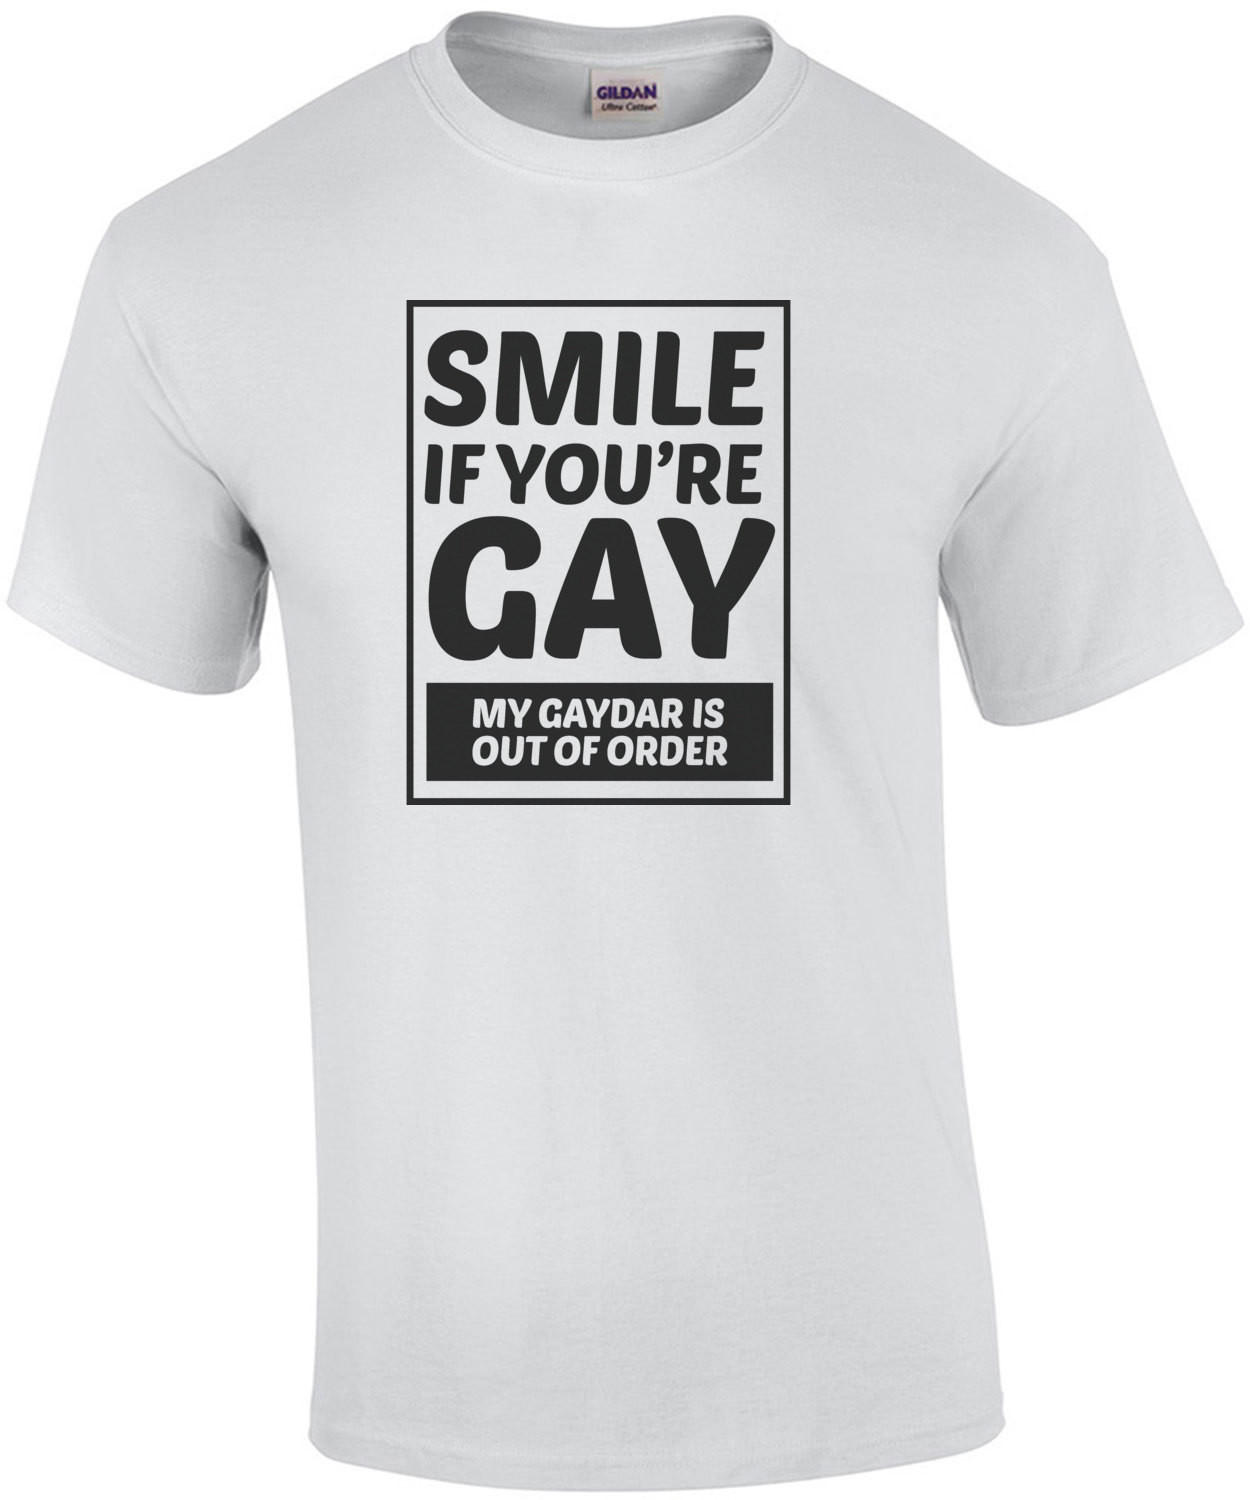 Smile if you're gay - my gaydar is out of order - gay pride t-shirt